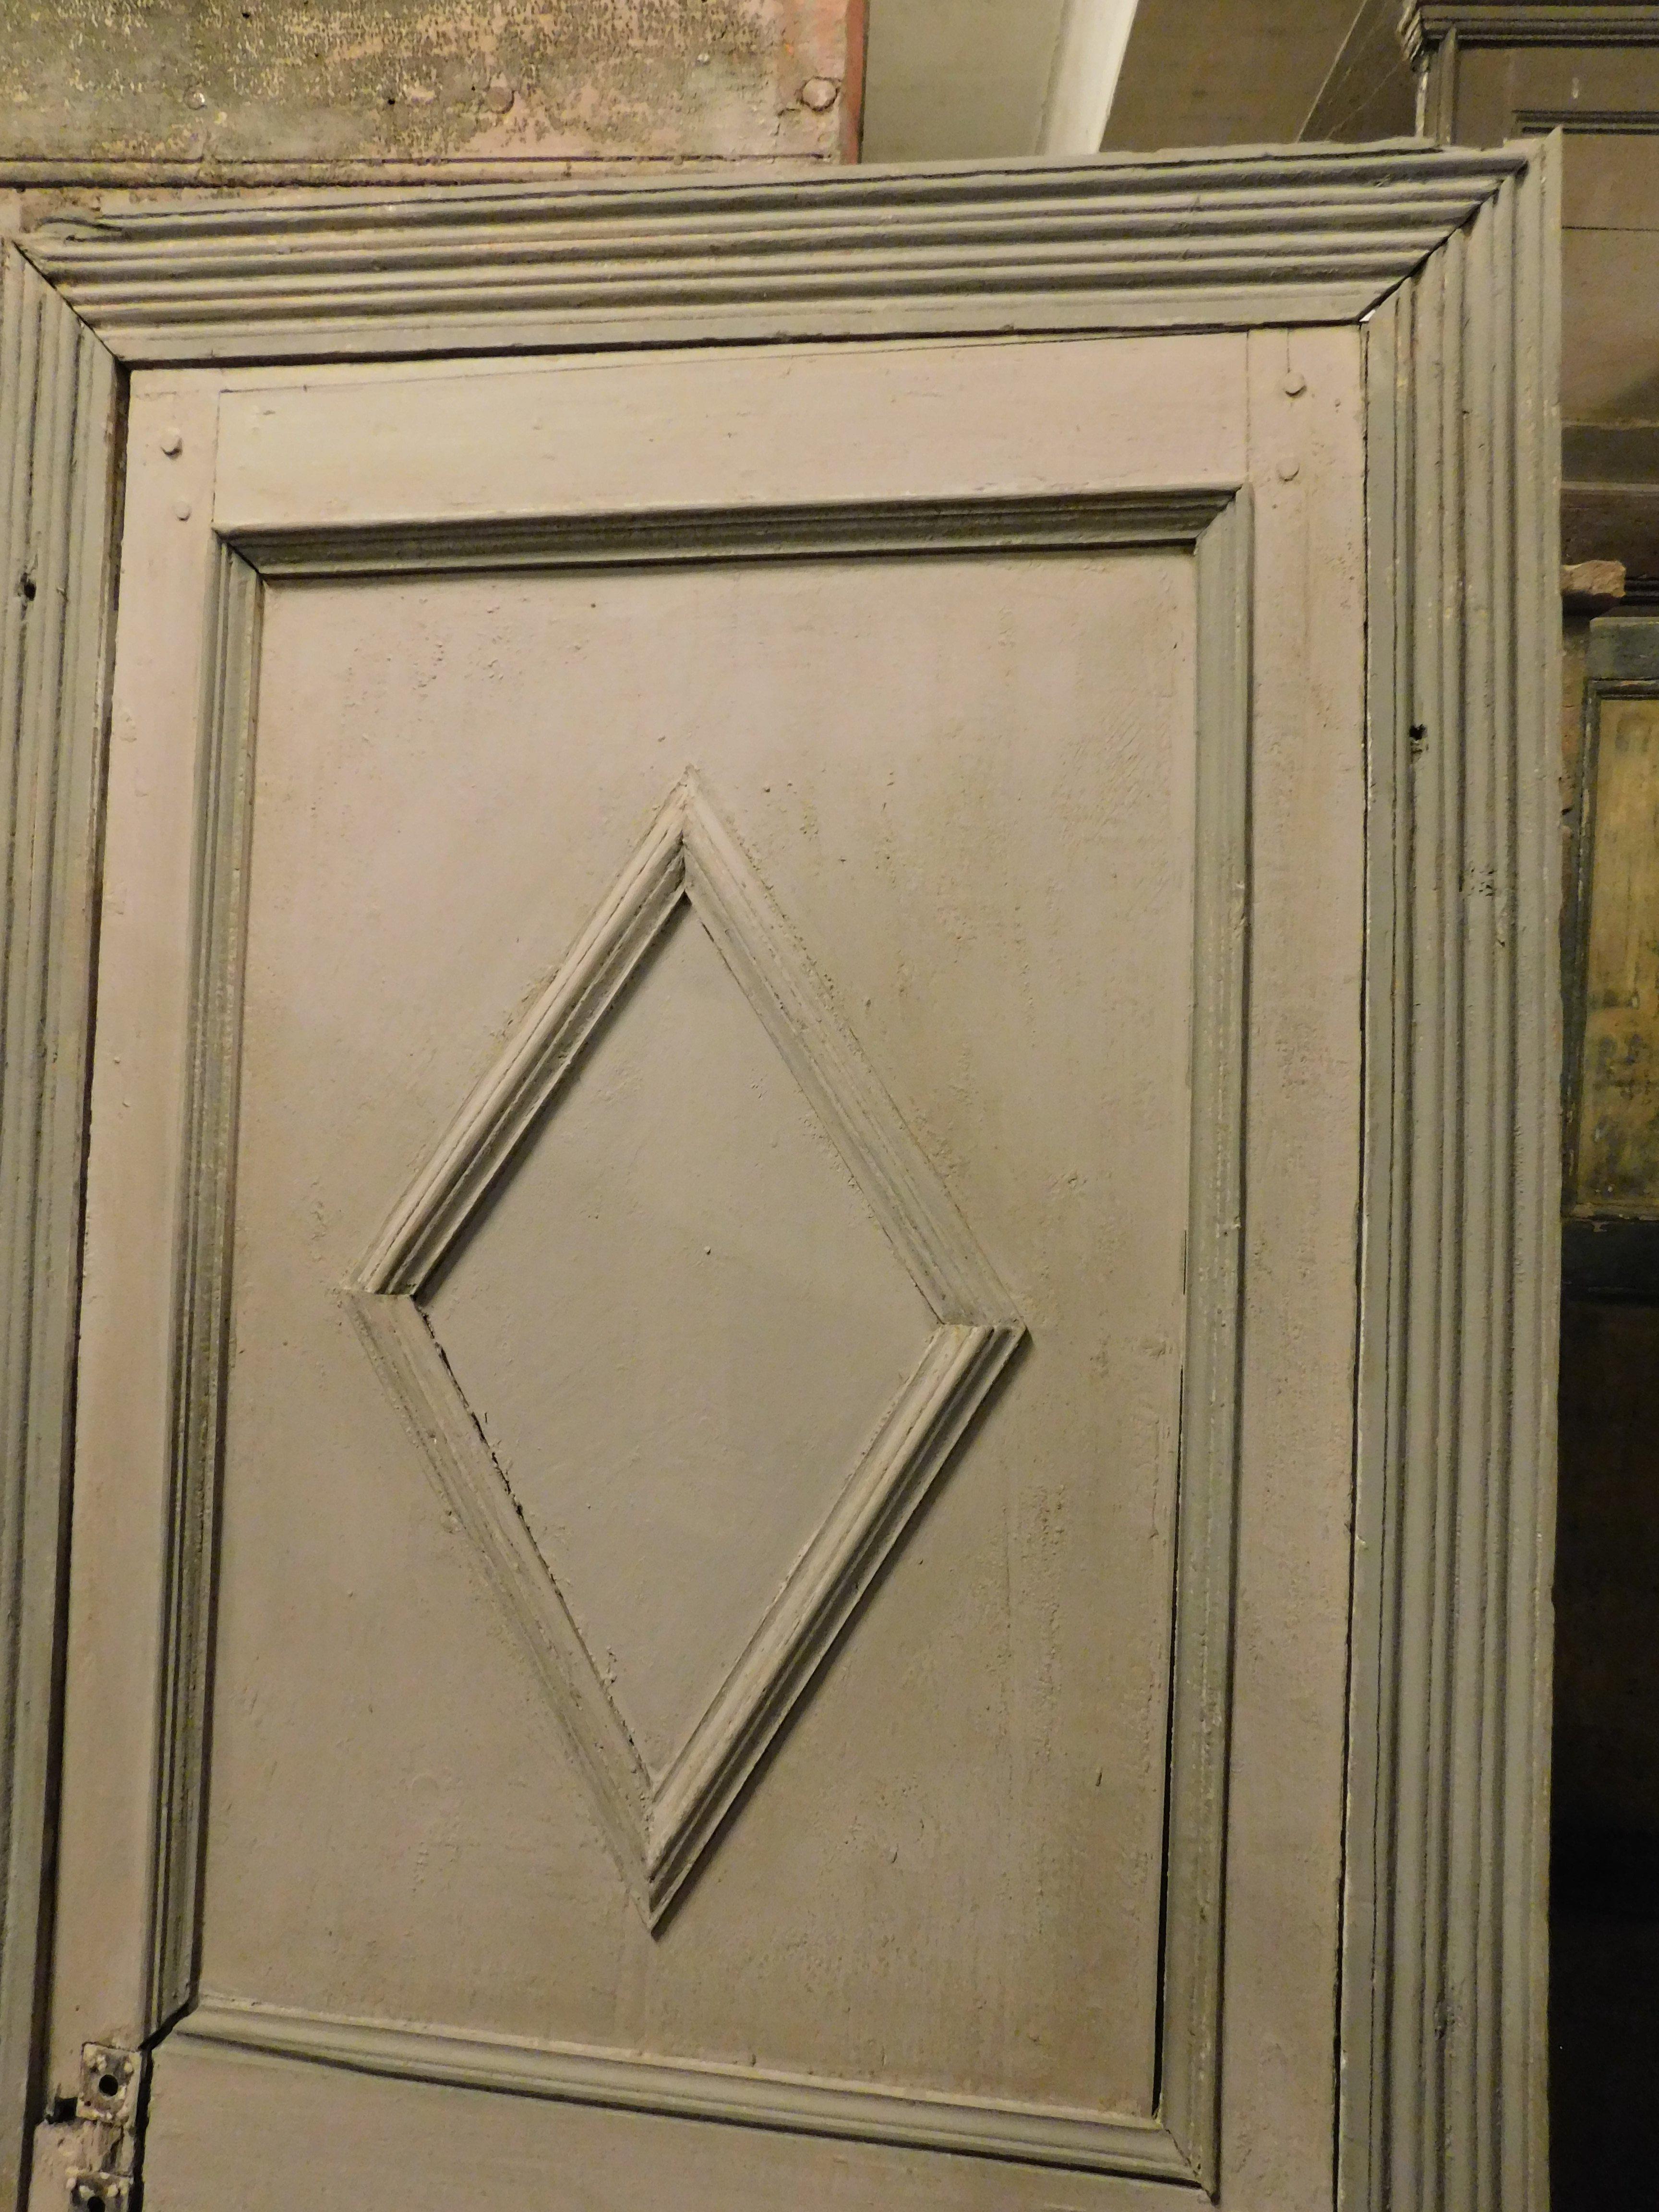 Antique hand-lacquered door with complete Coeval frame, panels with rhombus in relief. carved and lacquered moldings in contrast to the lacquering of the door. Opening push to the right, early 1800s, from northern/central Italy. Door with charming